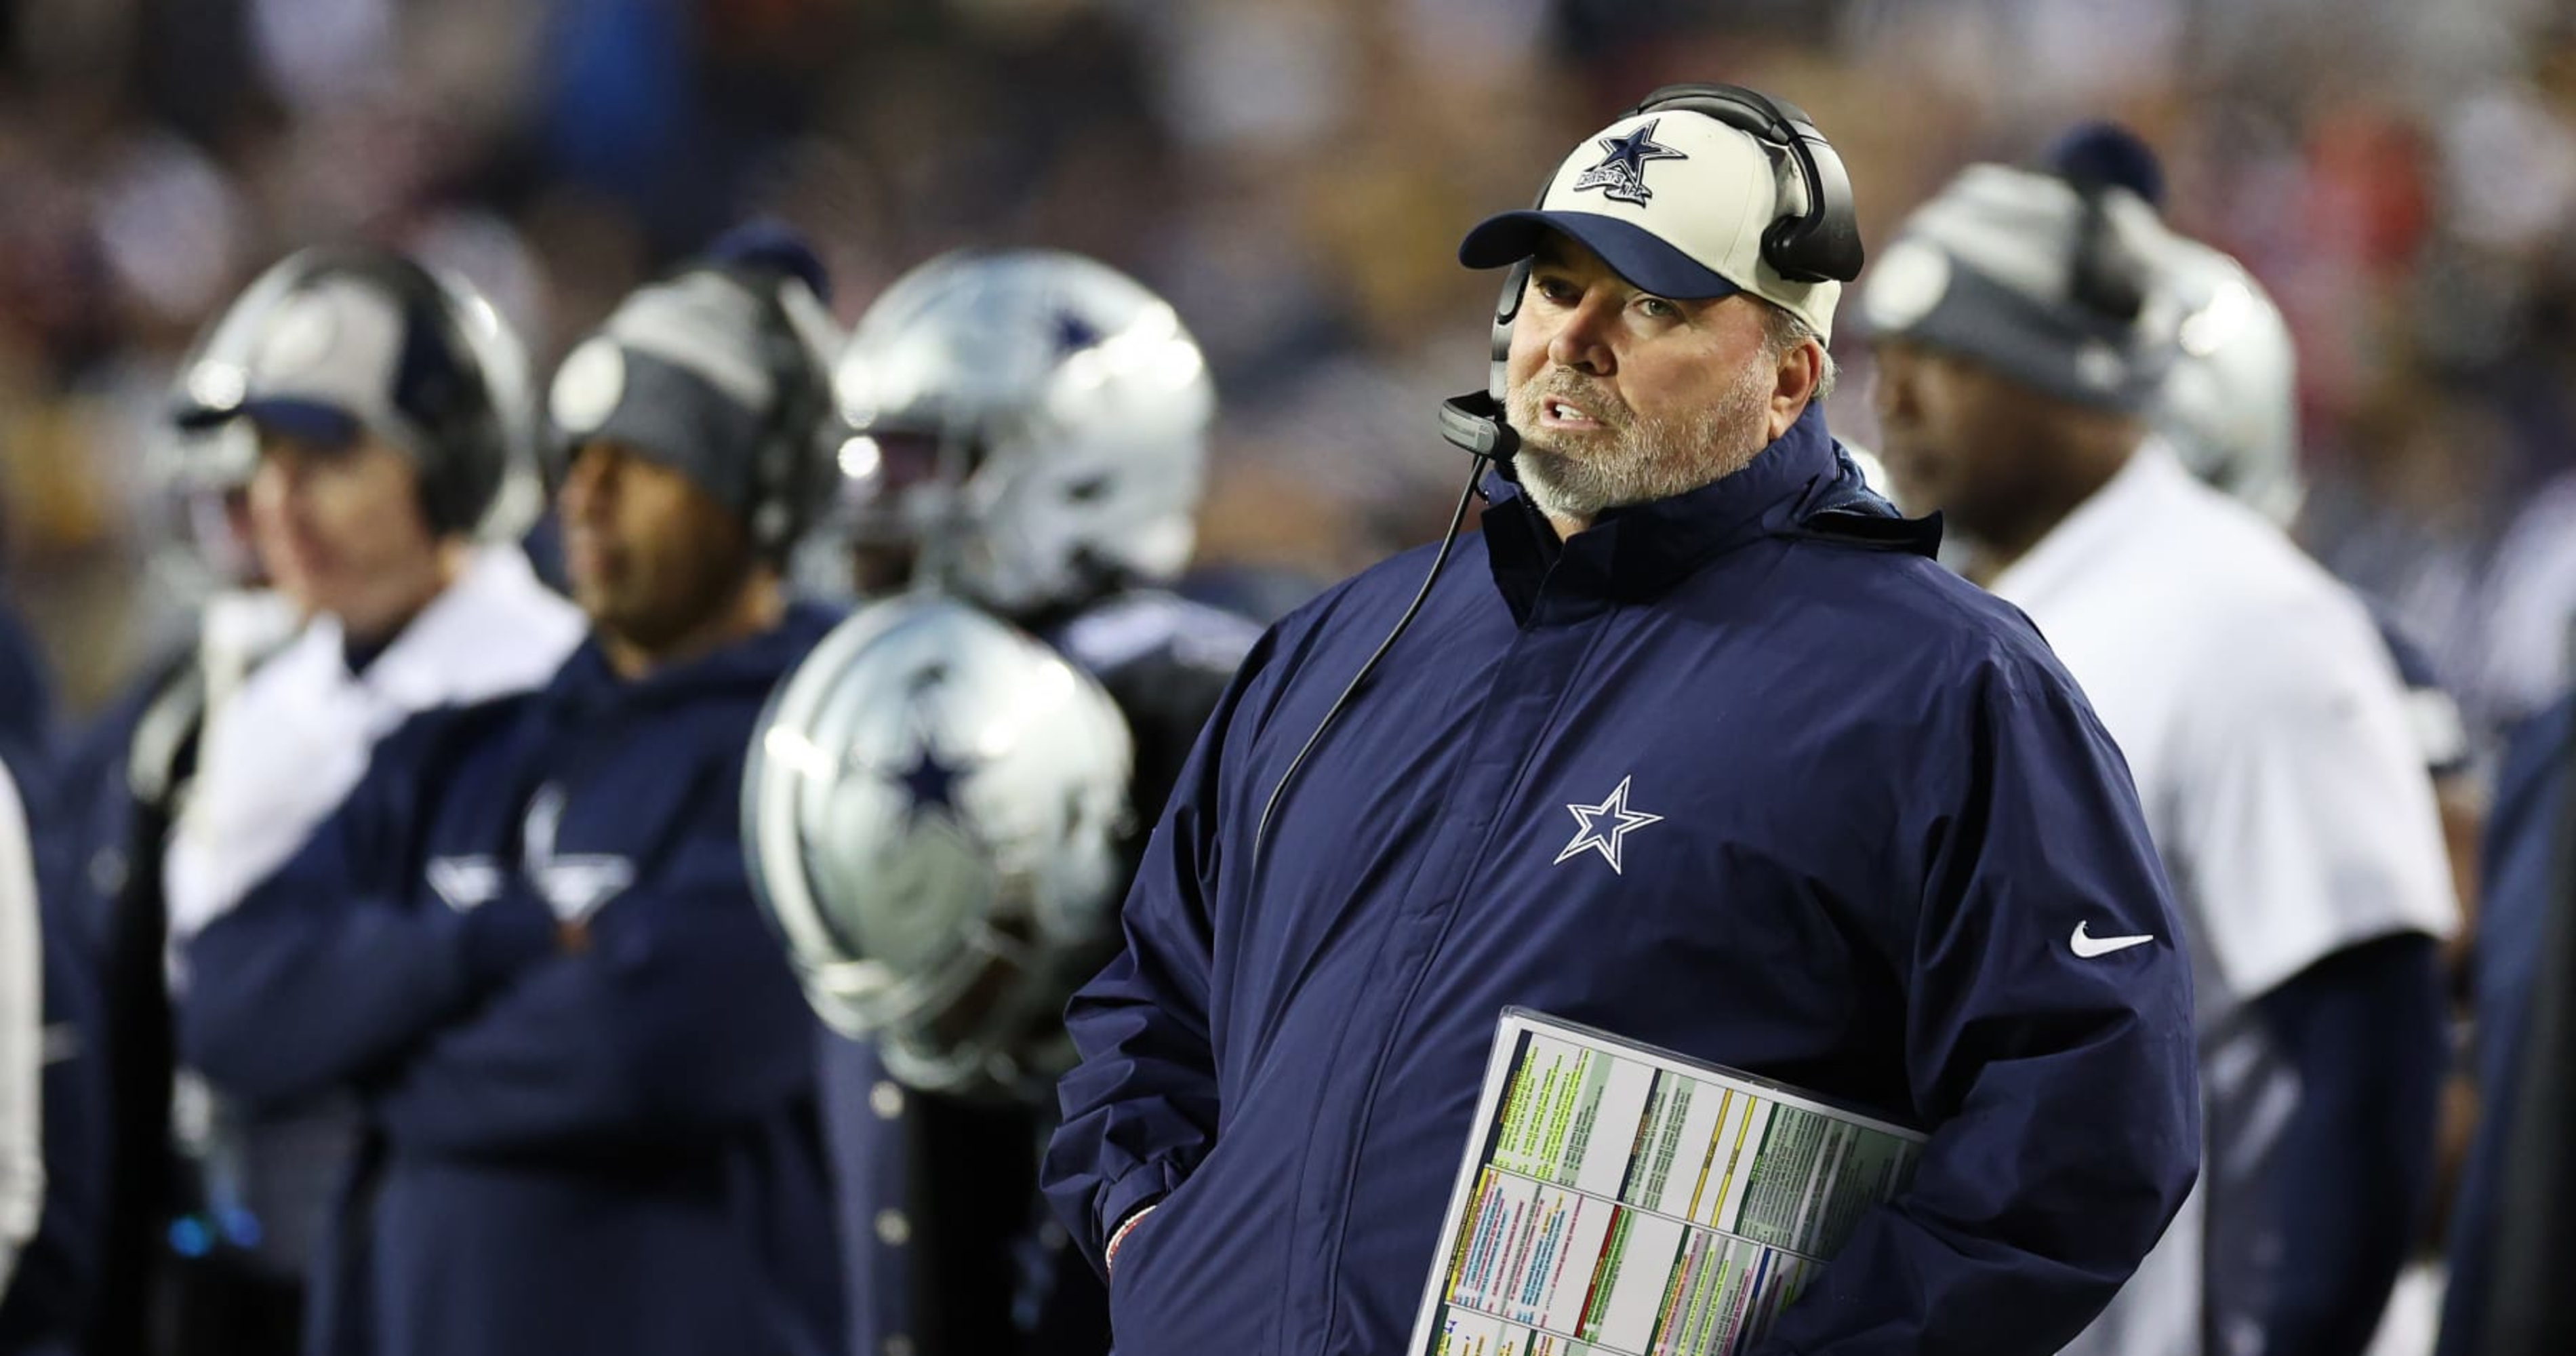 Cowboys Fans Fear Another NFL Playoffs Failure as Eagles Lock Up NFC's Top Seed